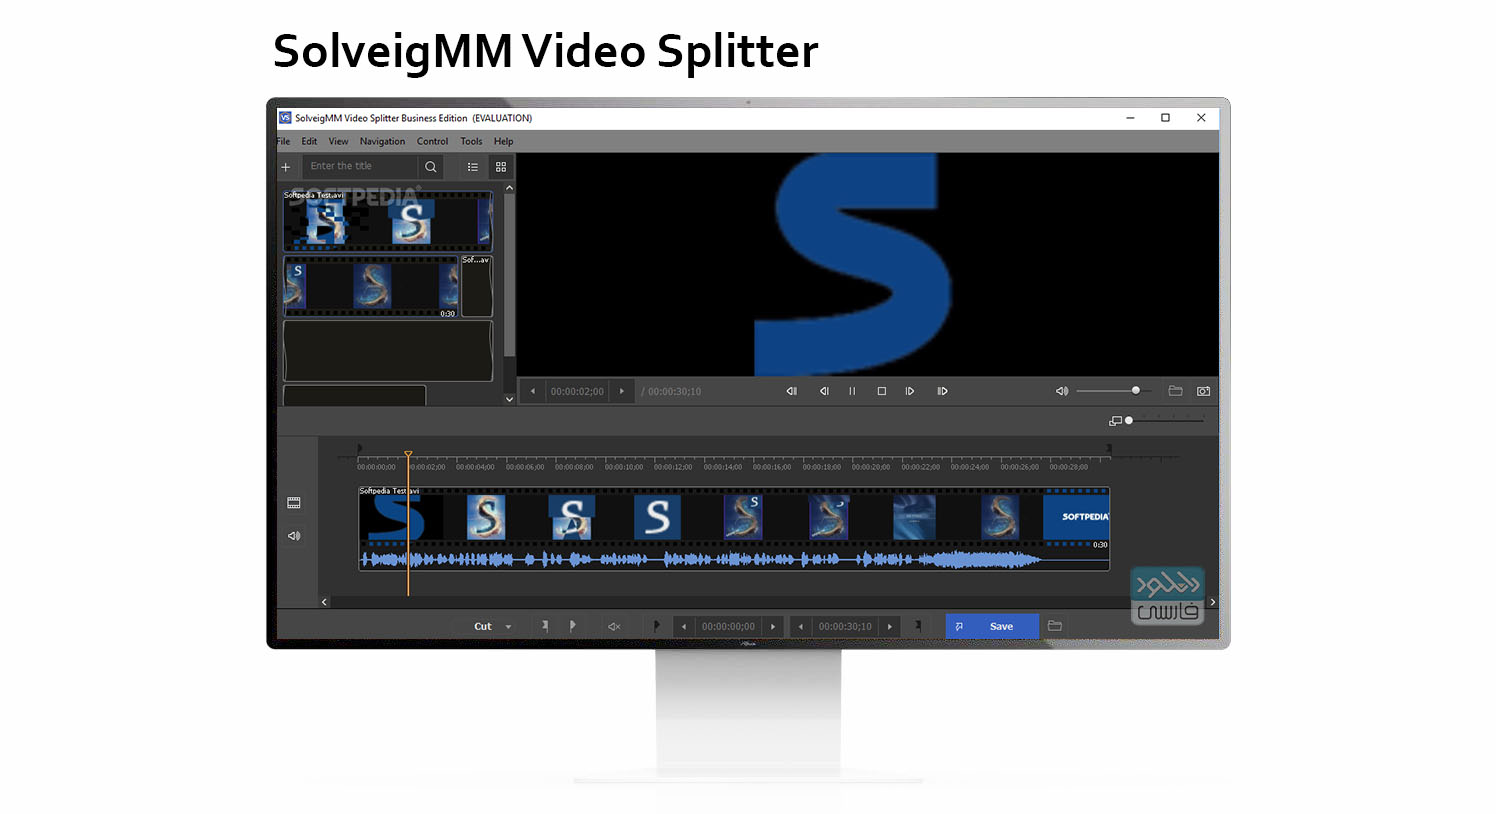 software with same interface as solveigmm video splitter